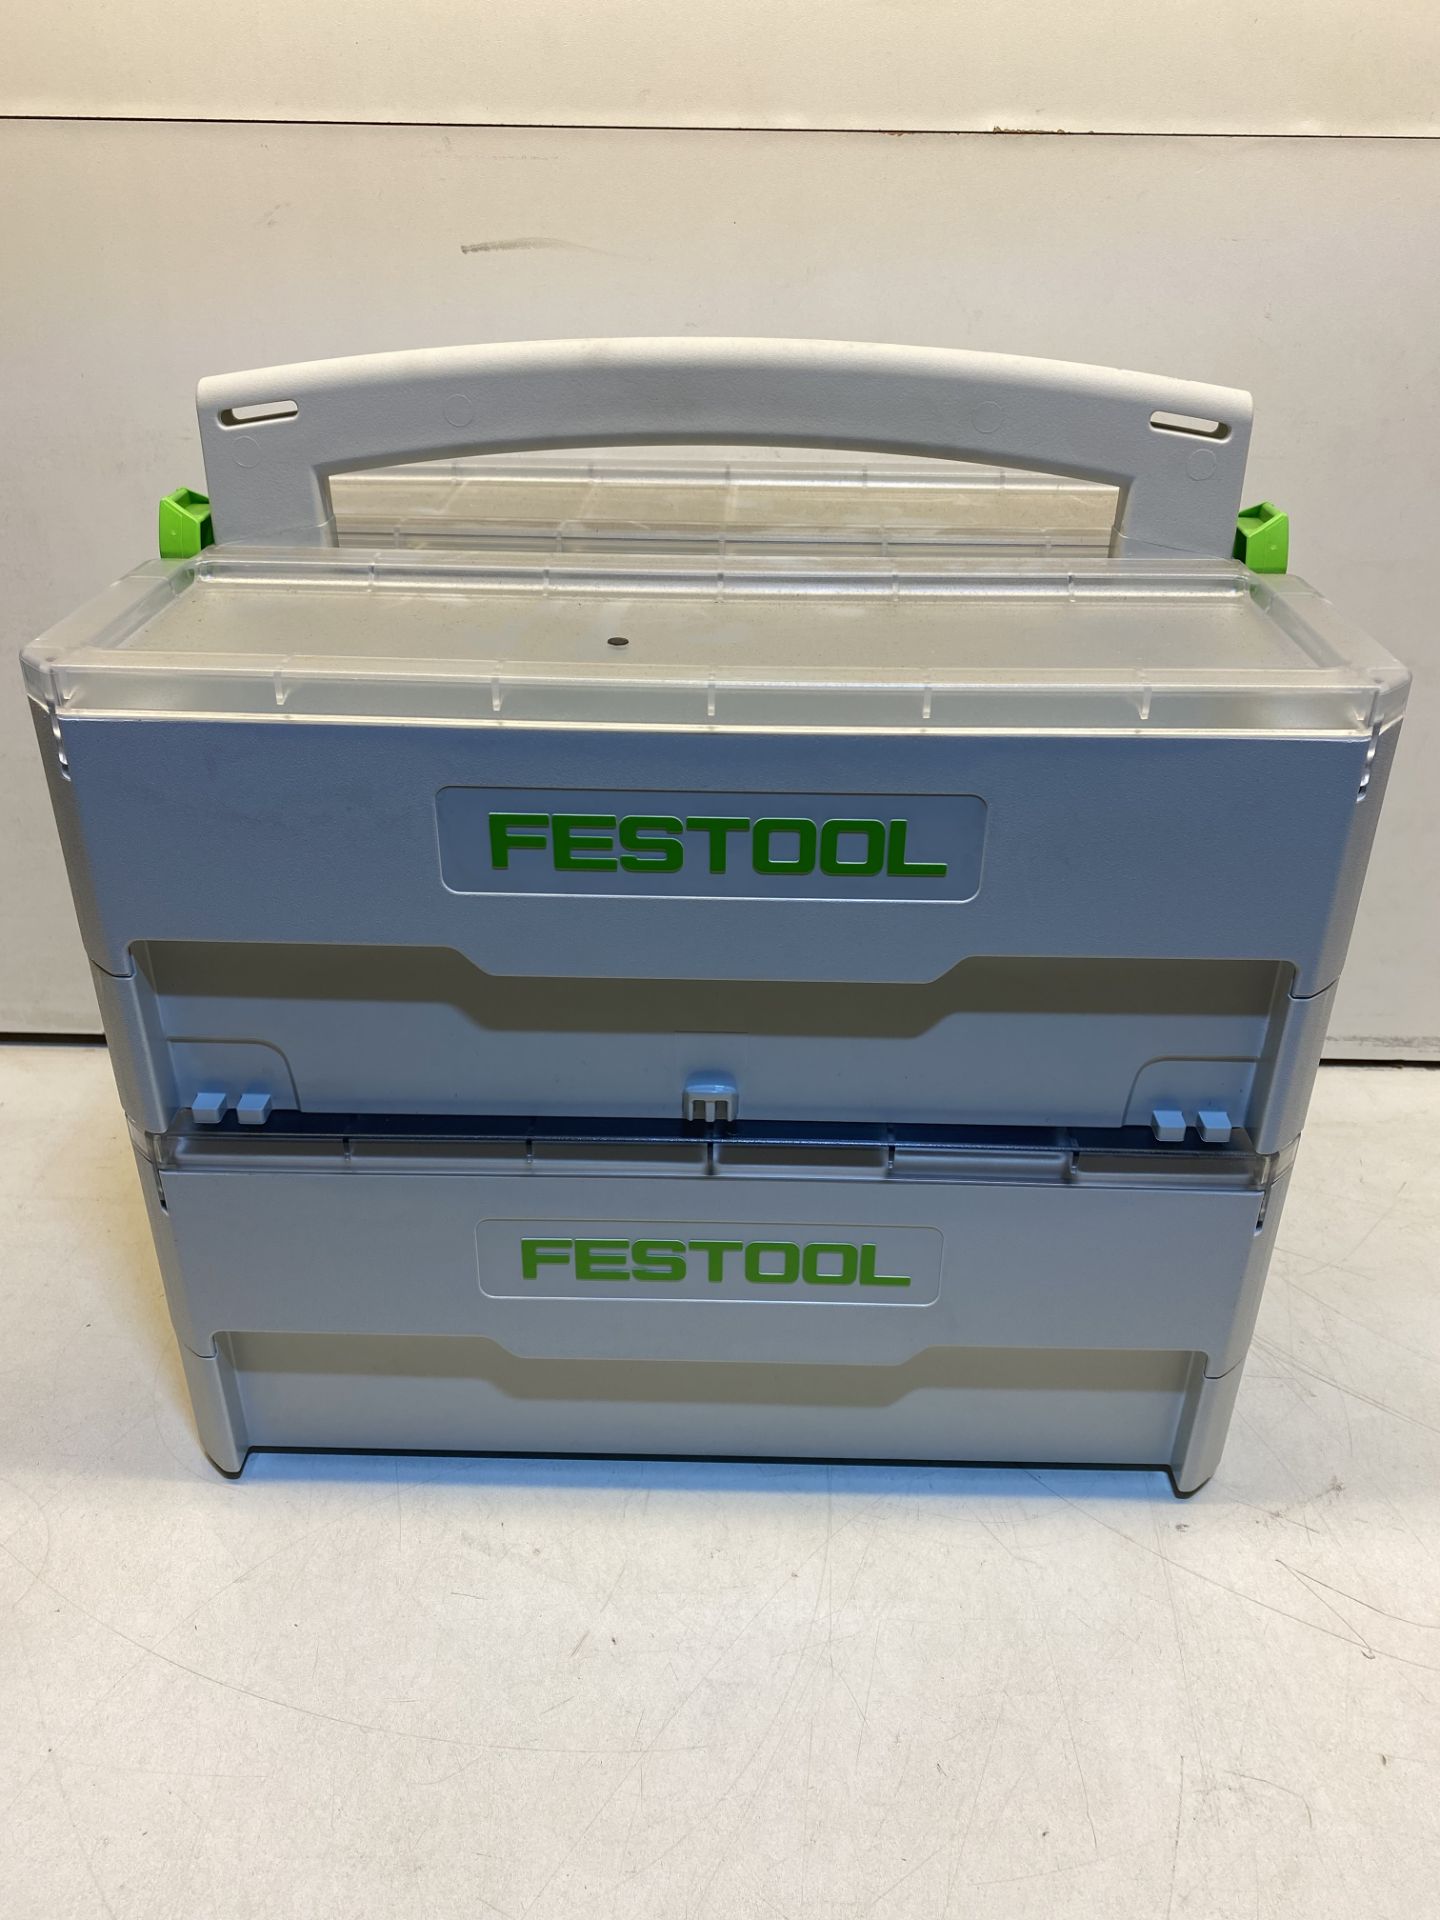 2 x Festool 499901 SYS-SB Cantilever Systainer Tool Box - Image 6 of 6